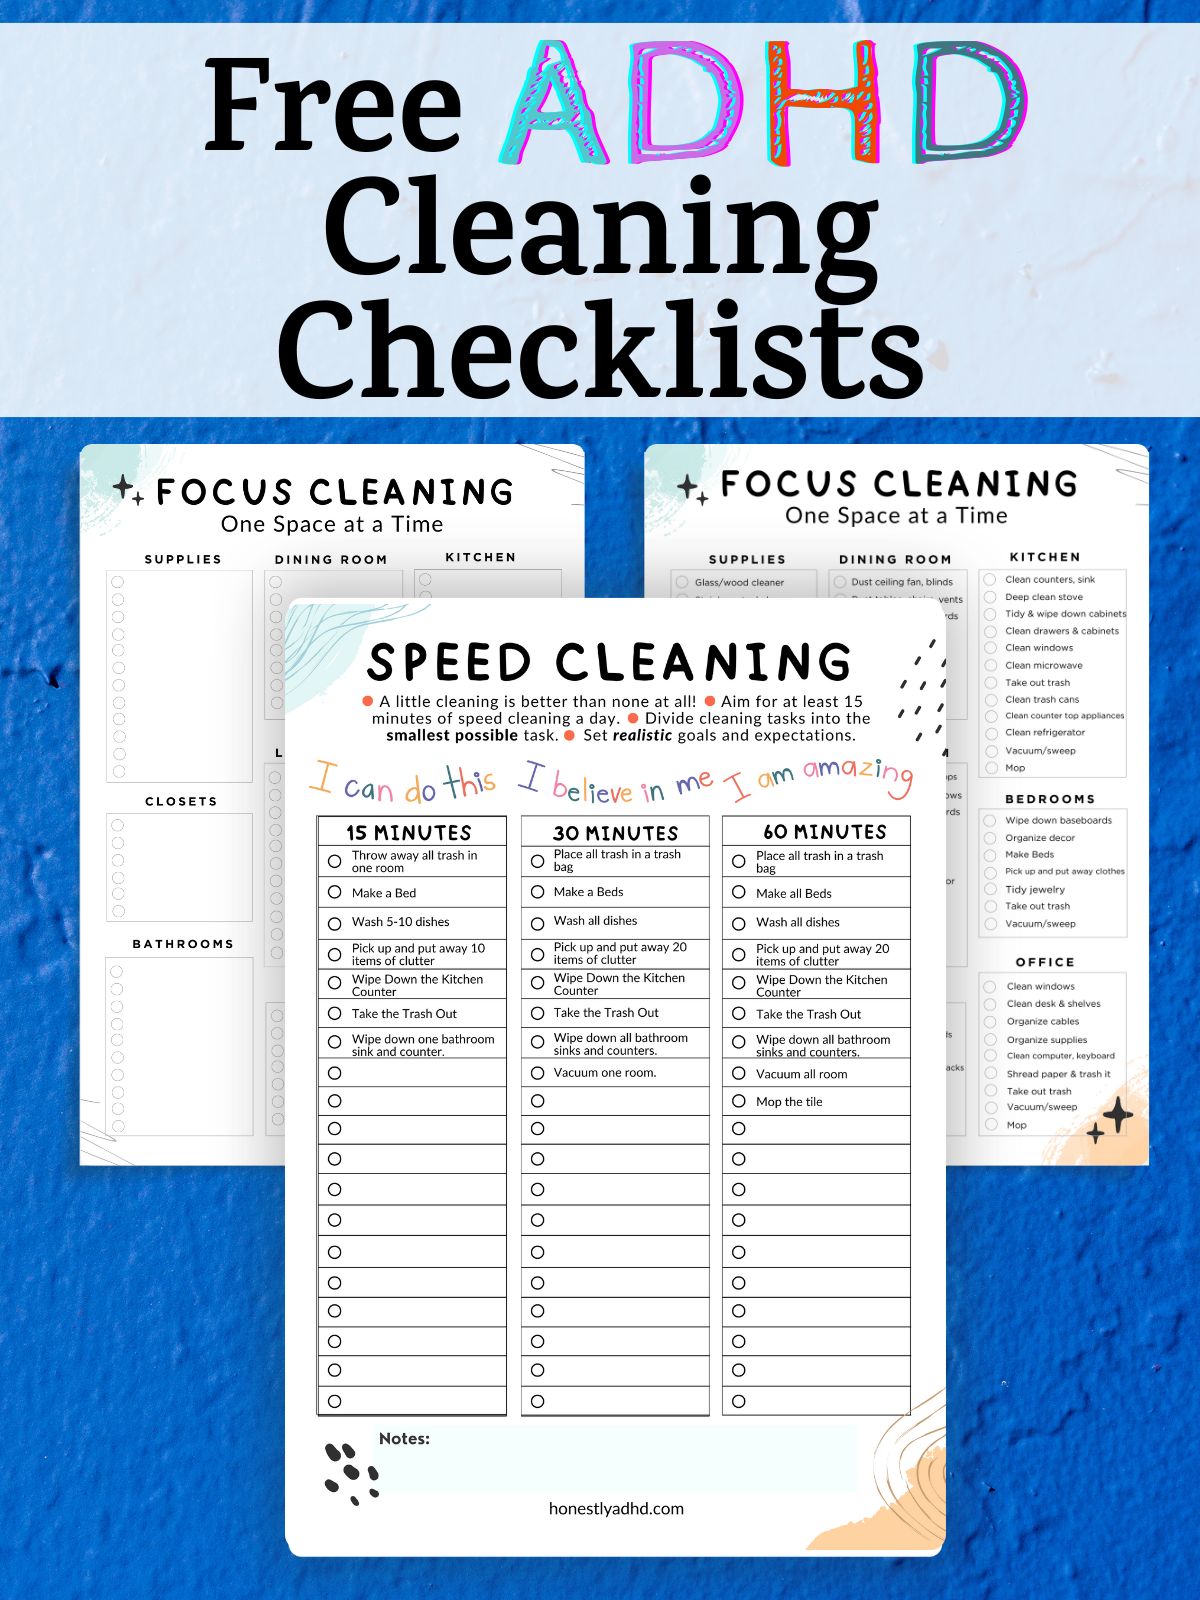 Three free printables with the text "Free ADHD Cleaning Checklists.."